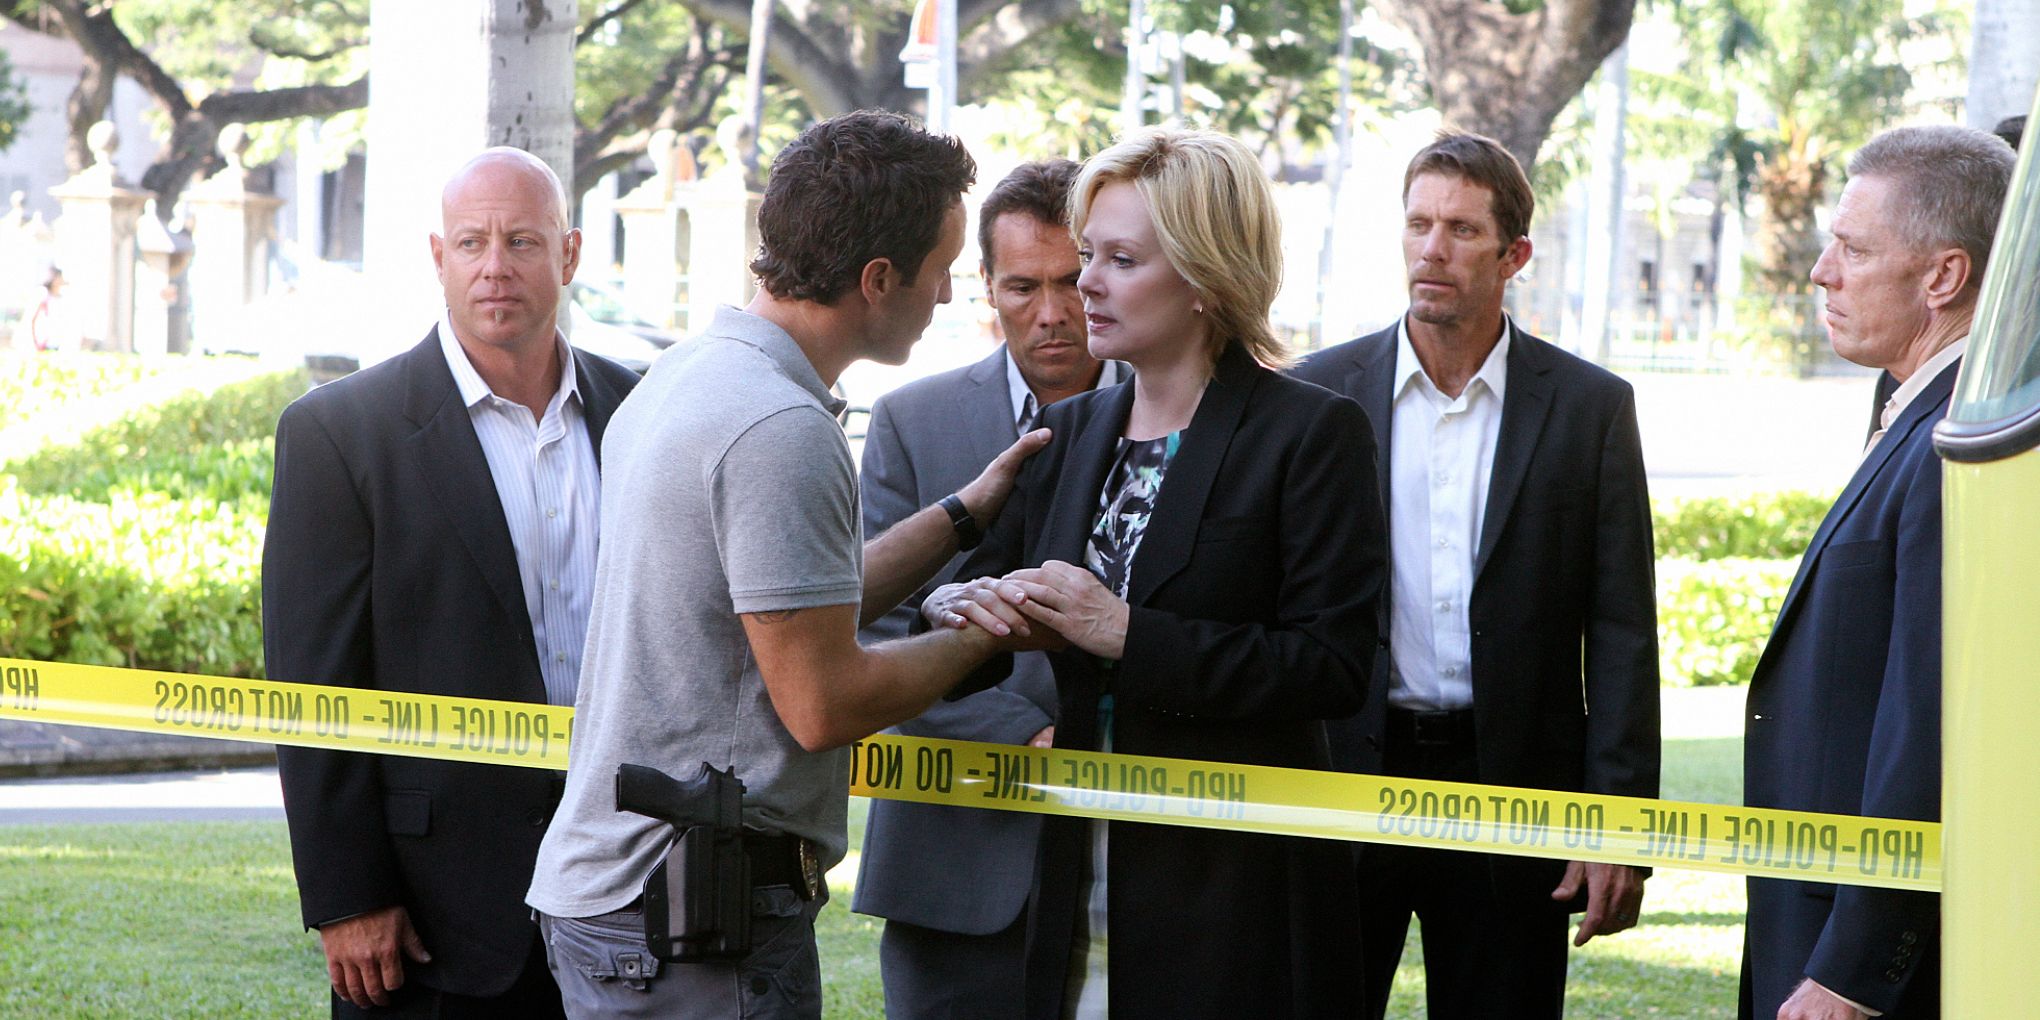 Steve talking to a group across police tape in Hawaii Five-0